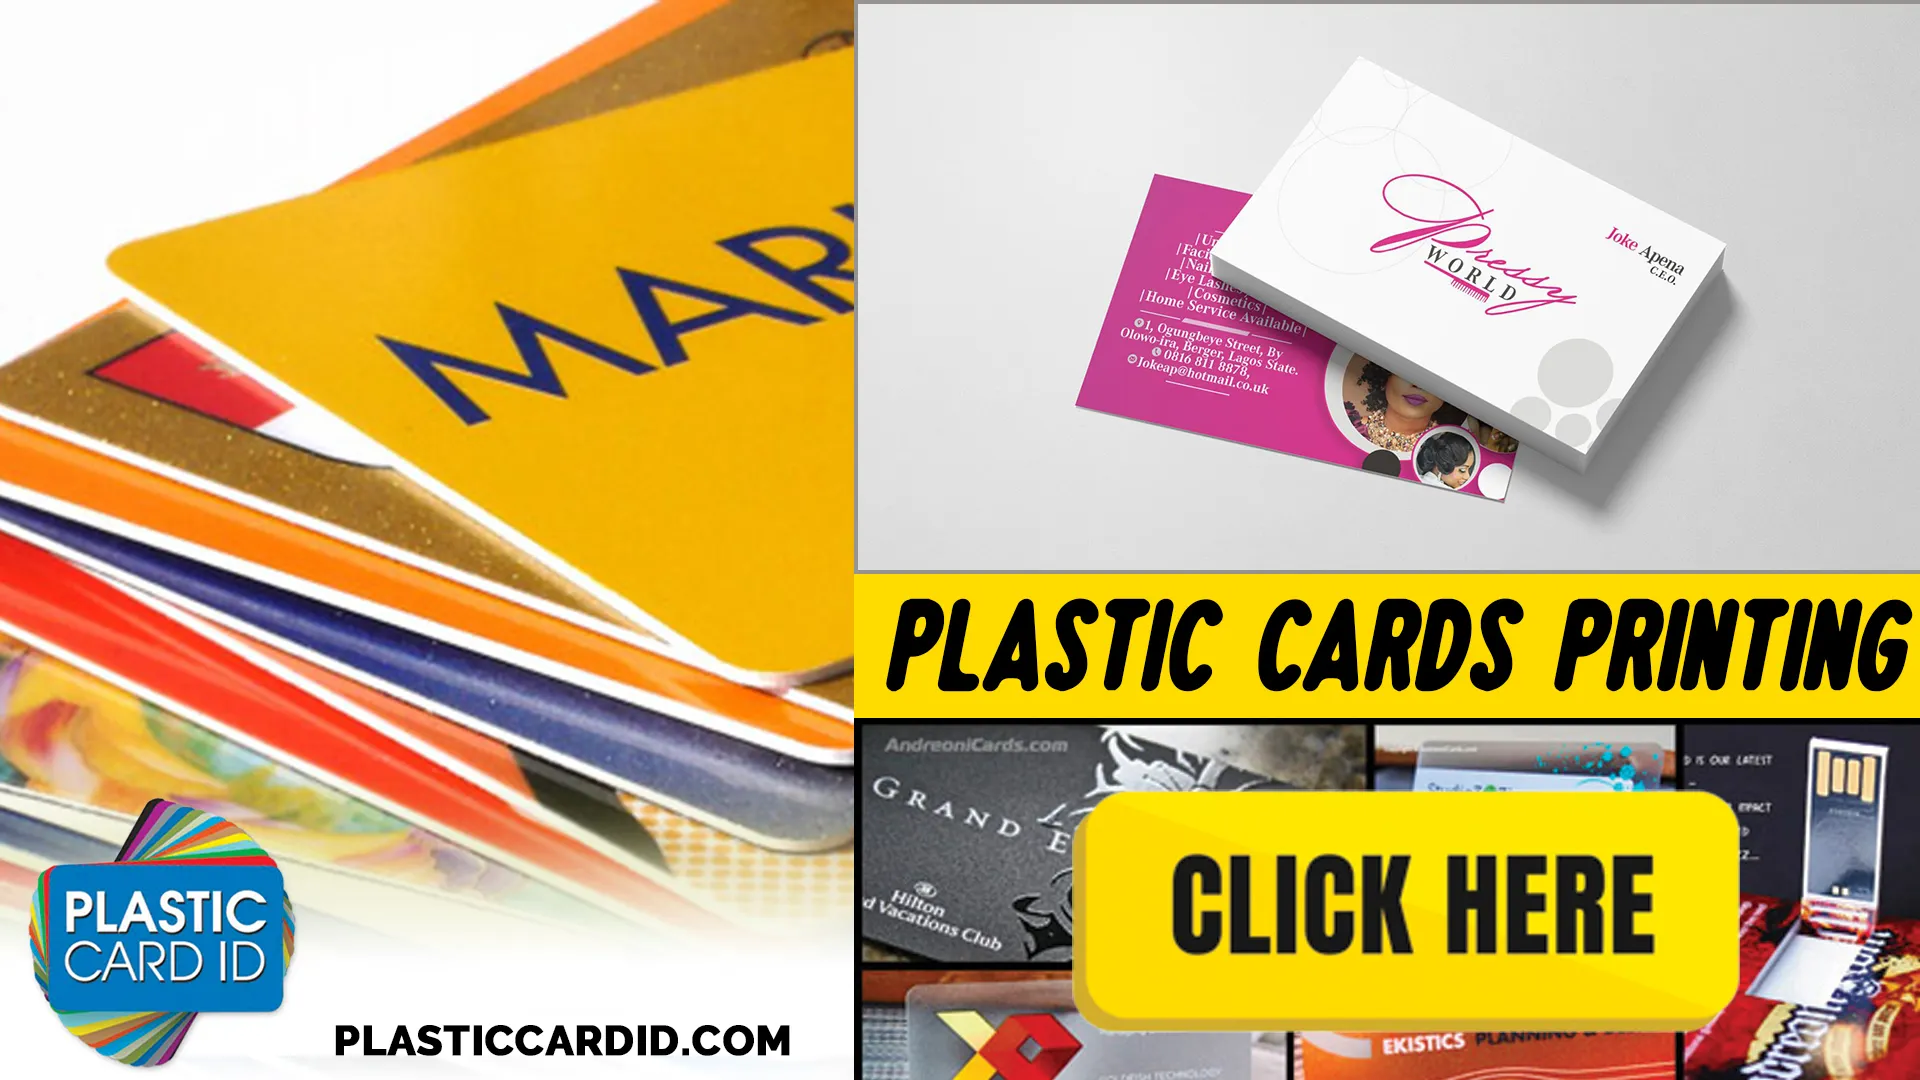 The Versatility of Plastic Card ID
's Printers - Where Innovative Meets Practical